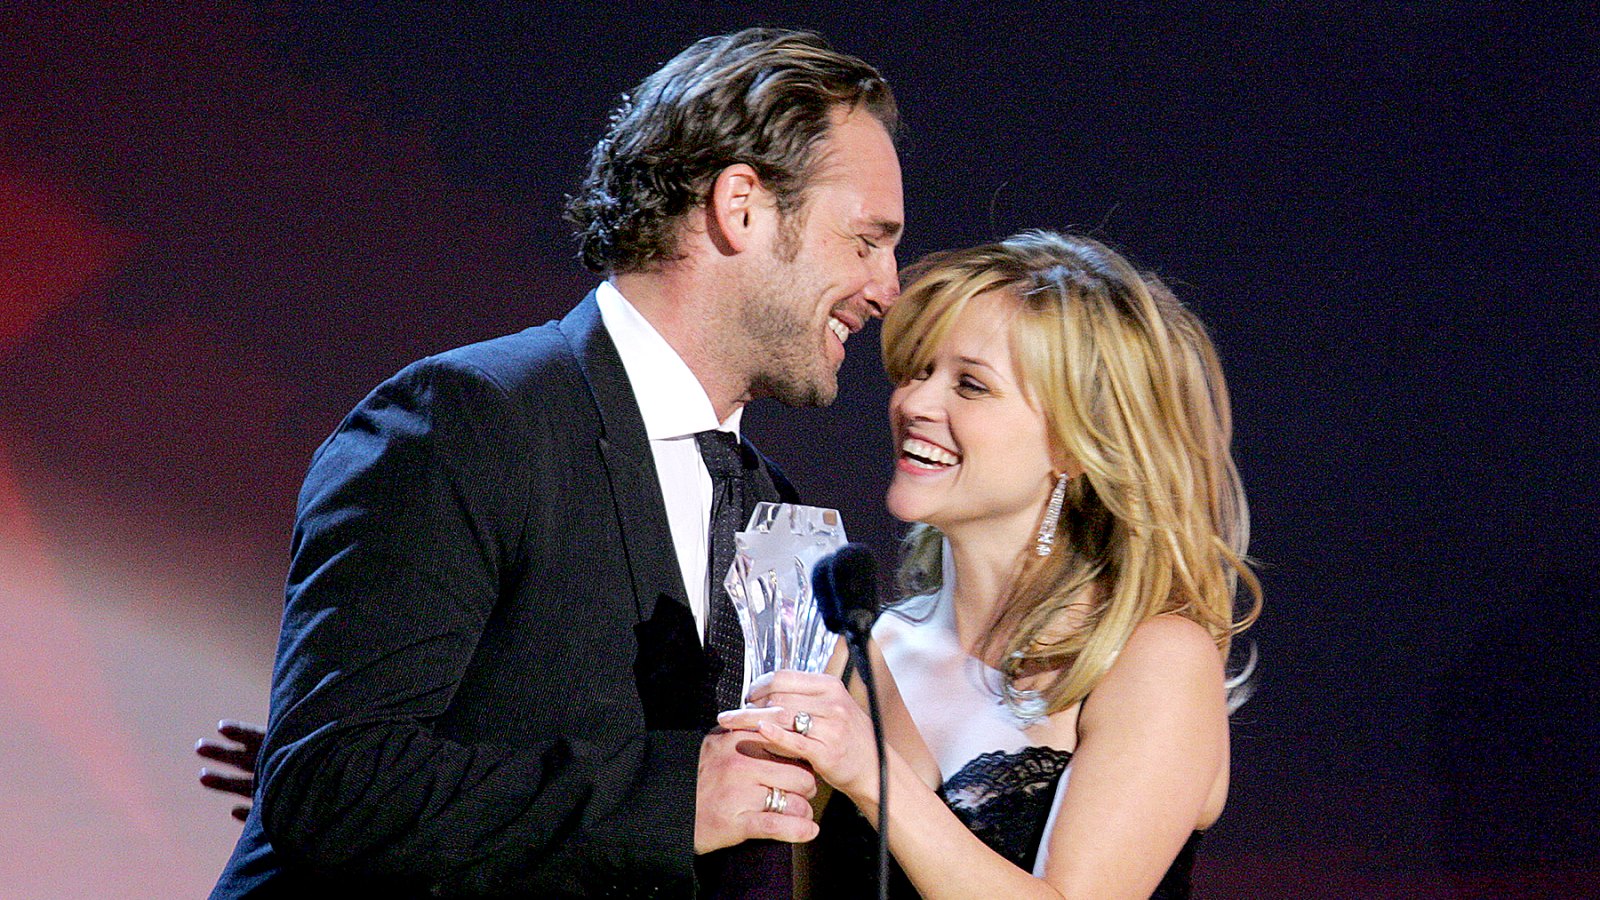 Josh-Lucas-and-Reese-Witherspoon